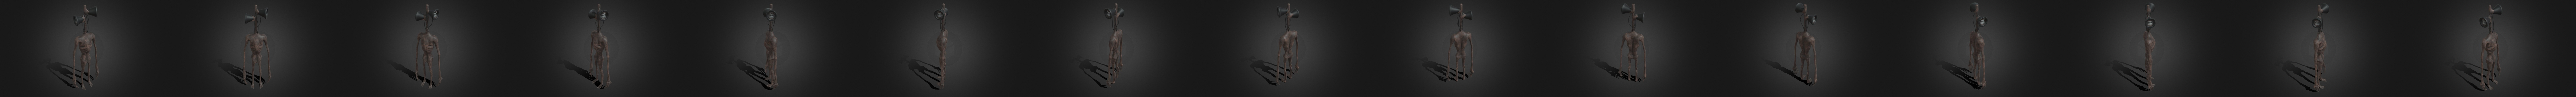 Siren Head 2018 Game - Download Free 3D model by SCP (@scpfoundation2008)  [3079135]